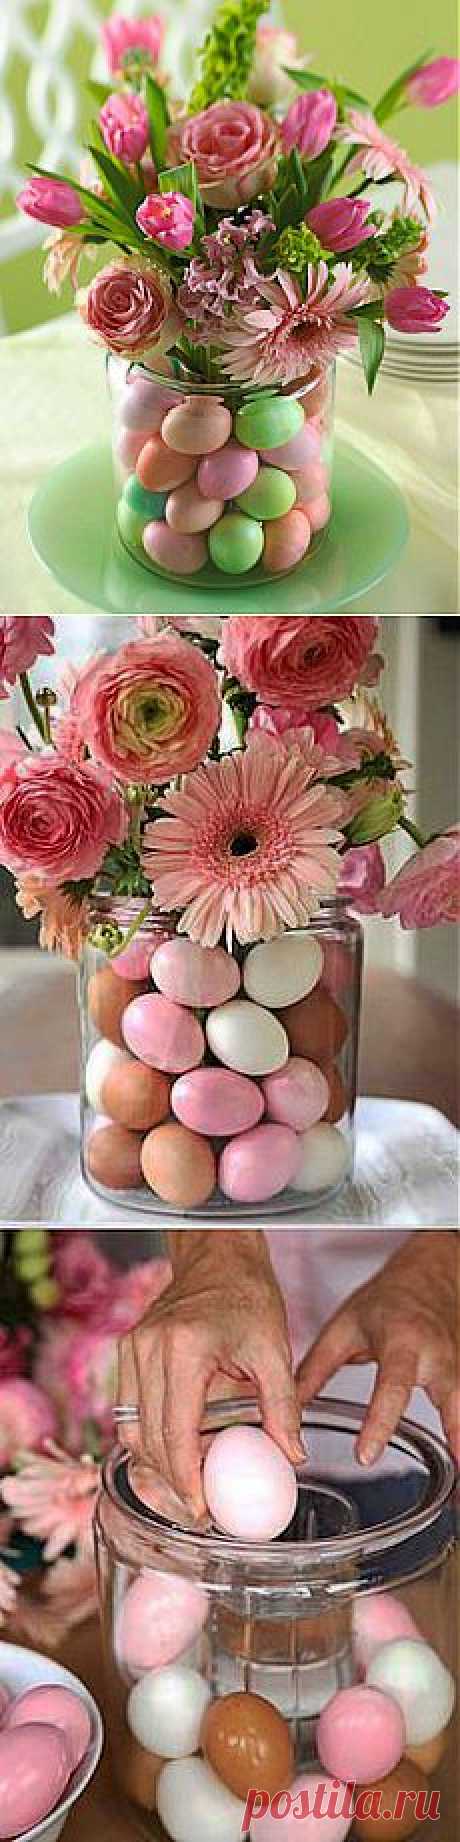 Pretty Ways to Decorate with Easter Eggs